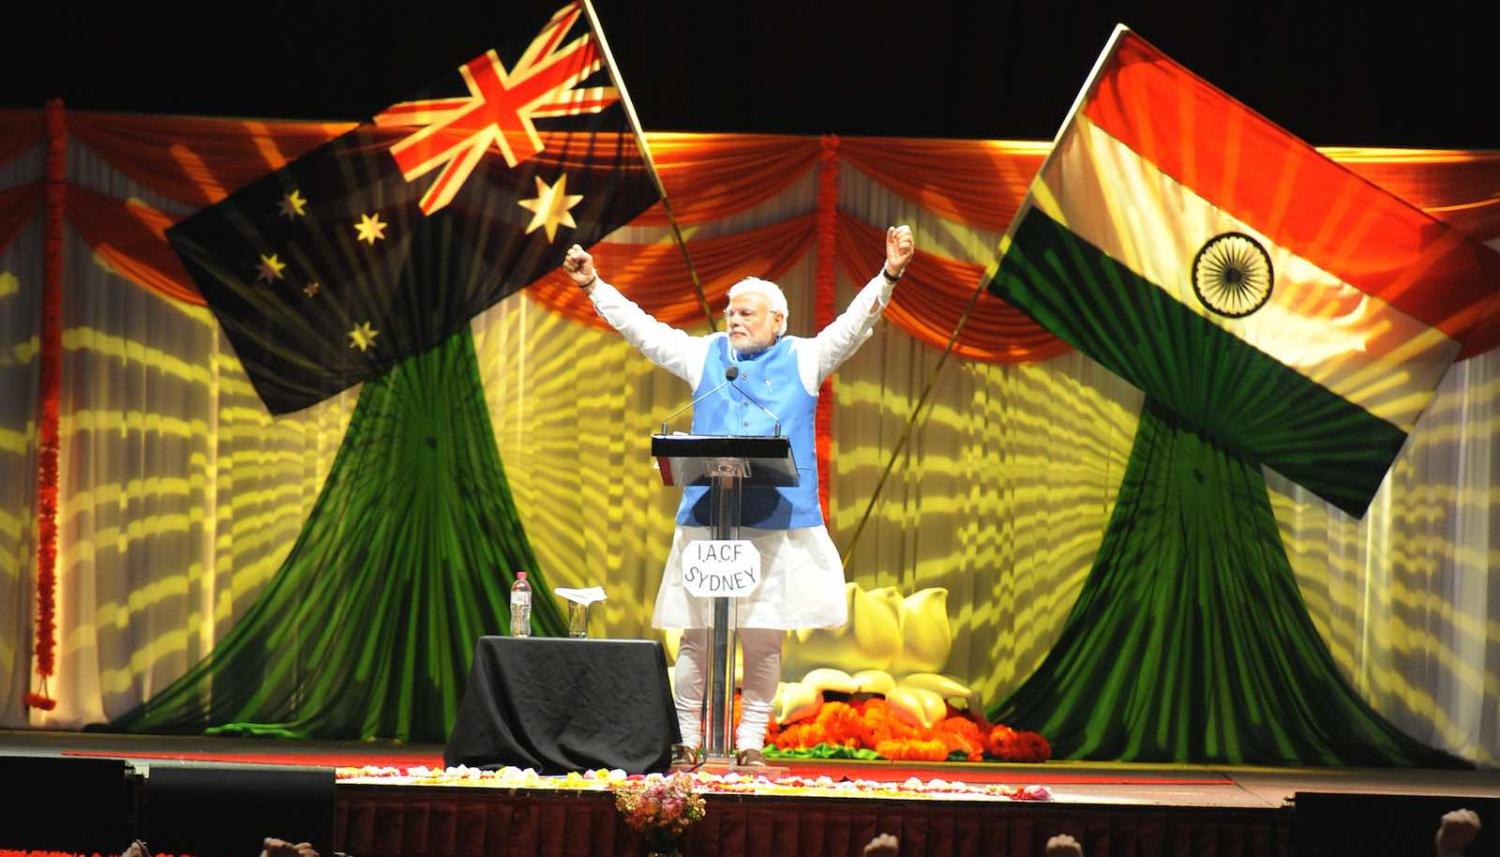 Indian Prime Minister Narendra Modi at Allphones Arena in Sydney, November 2014, when Australia hosted the G20 summit (Photo: MEAphotogallery/Flickr)